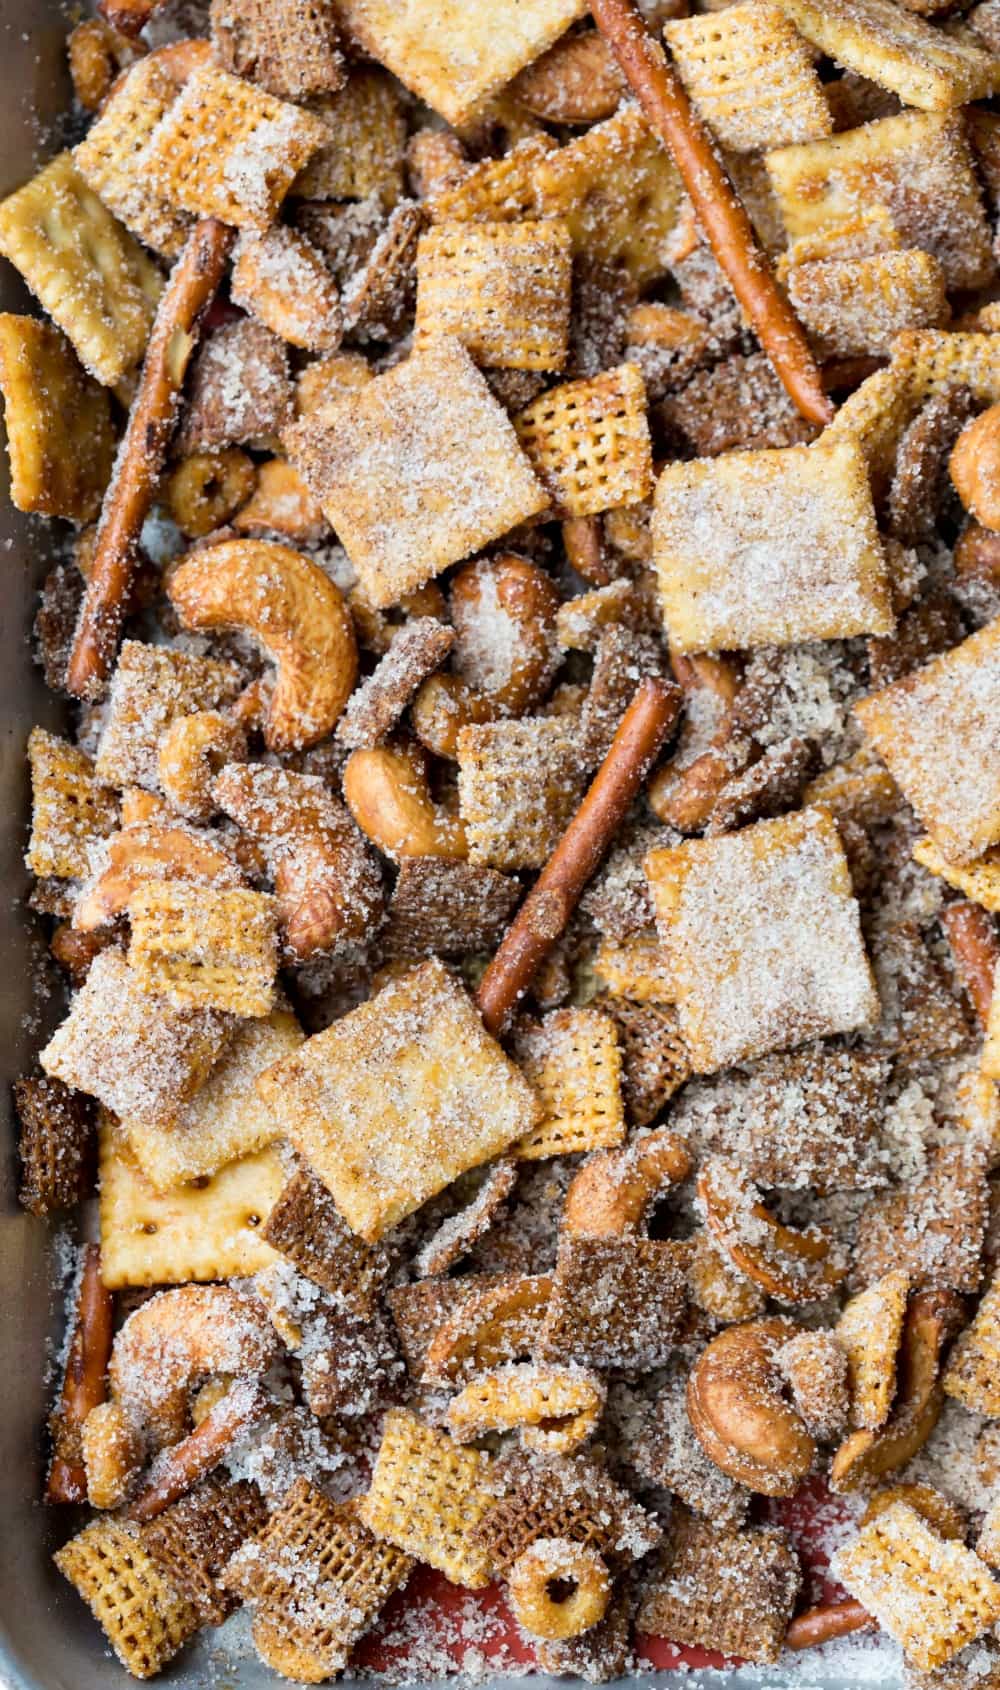 Cinnamon Sweet and Salty Chex Mix - I Heart Eating